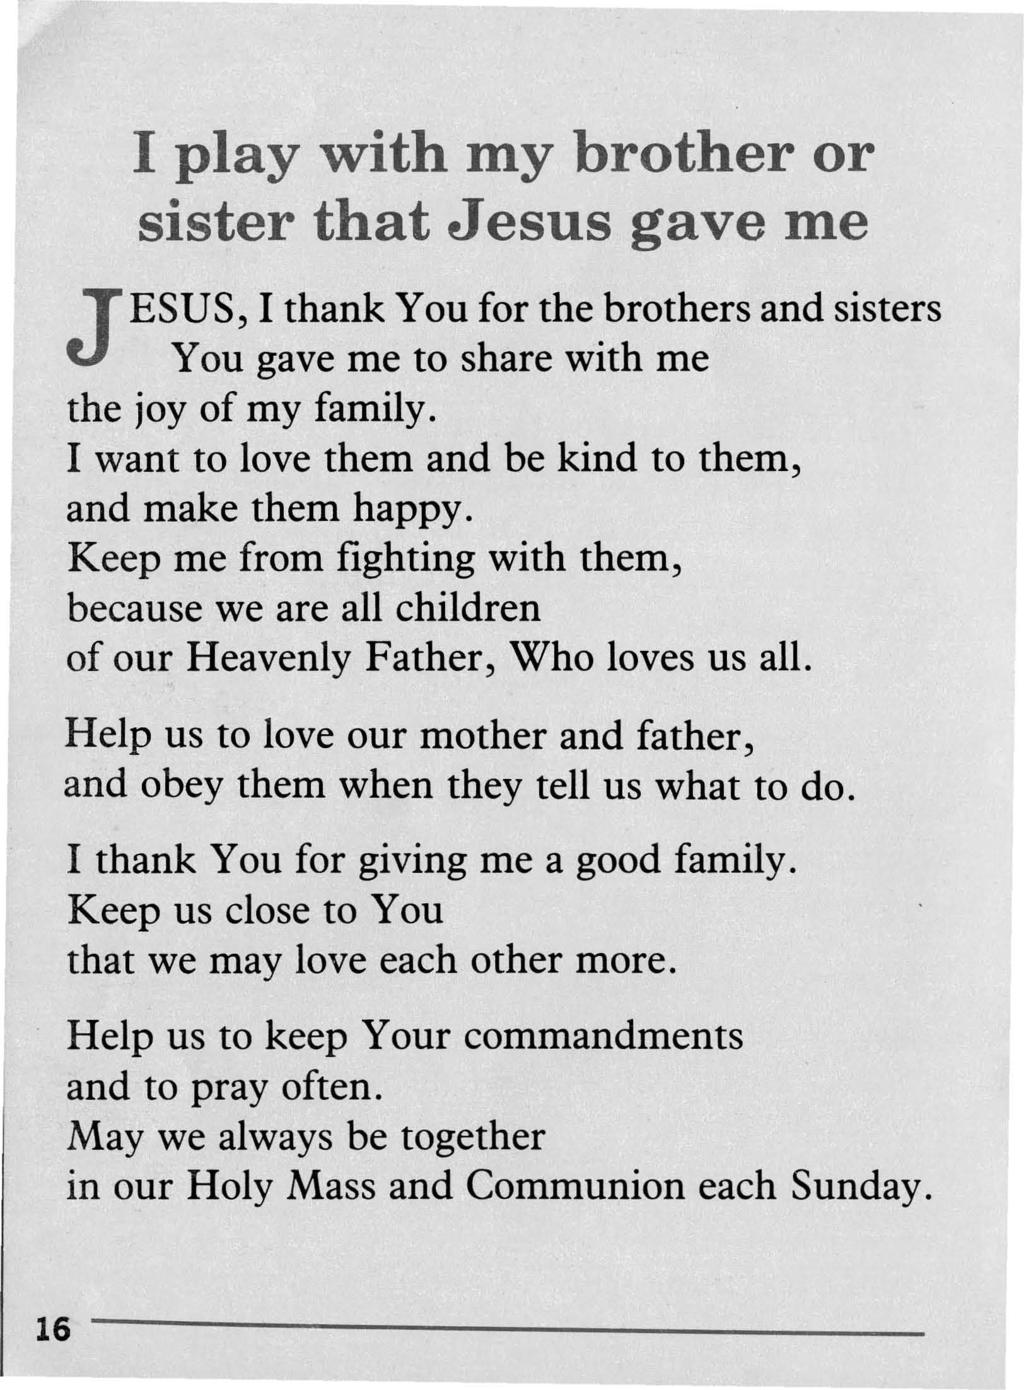 I play with my brother or sister that Jesus gave me J ESUS, I thank You for the brothers and sisters You gave me to share with me the joy of my family.